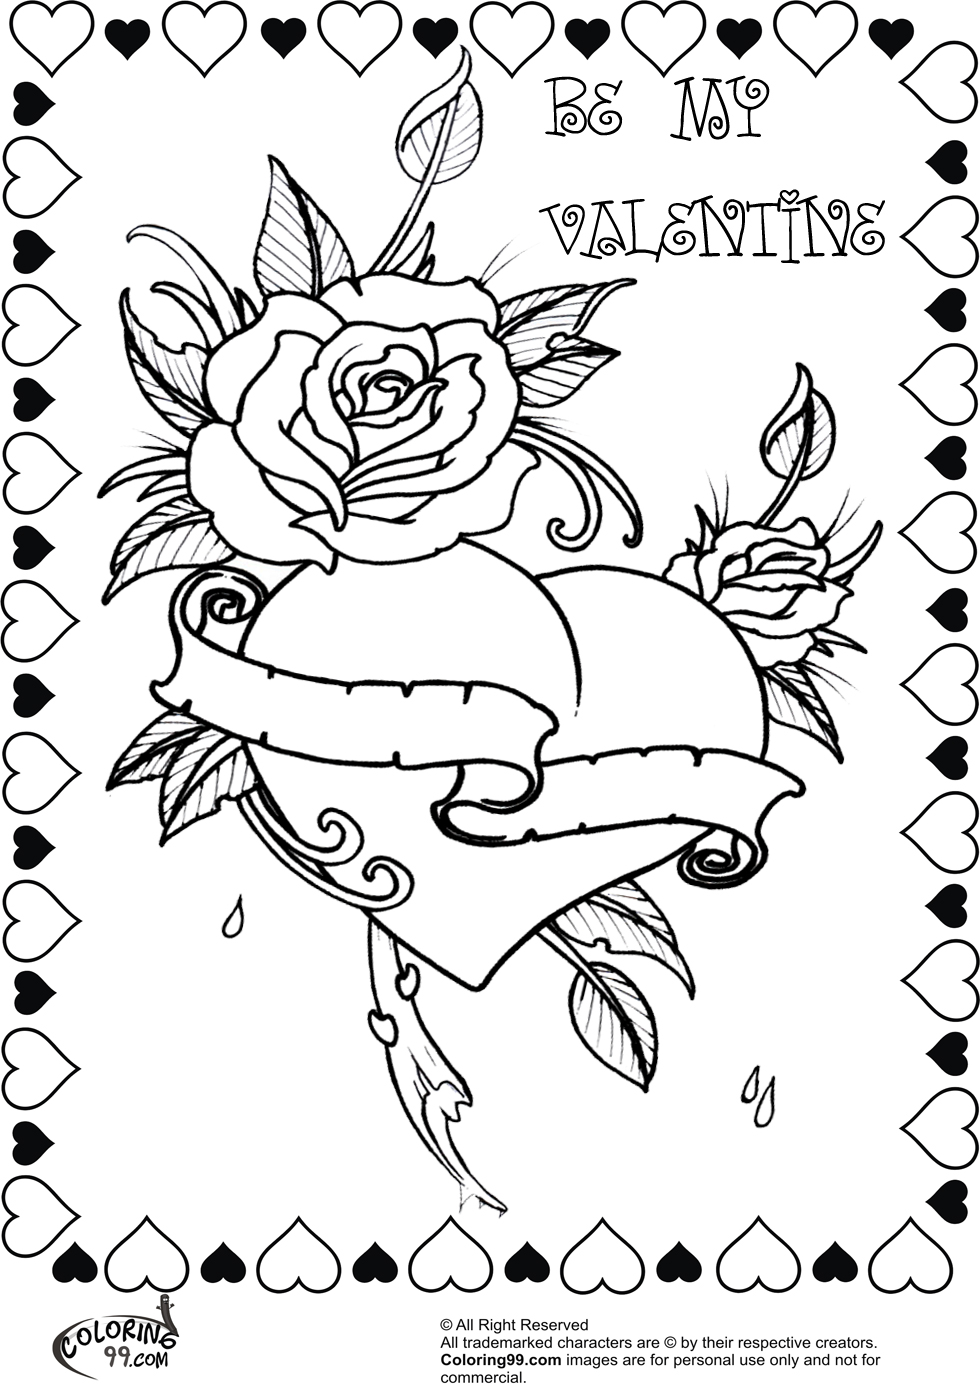 Valentine Adult Coloring Pages At GetColorings Free Printable Colorings Pages To Print And